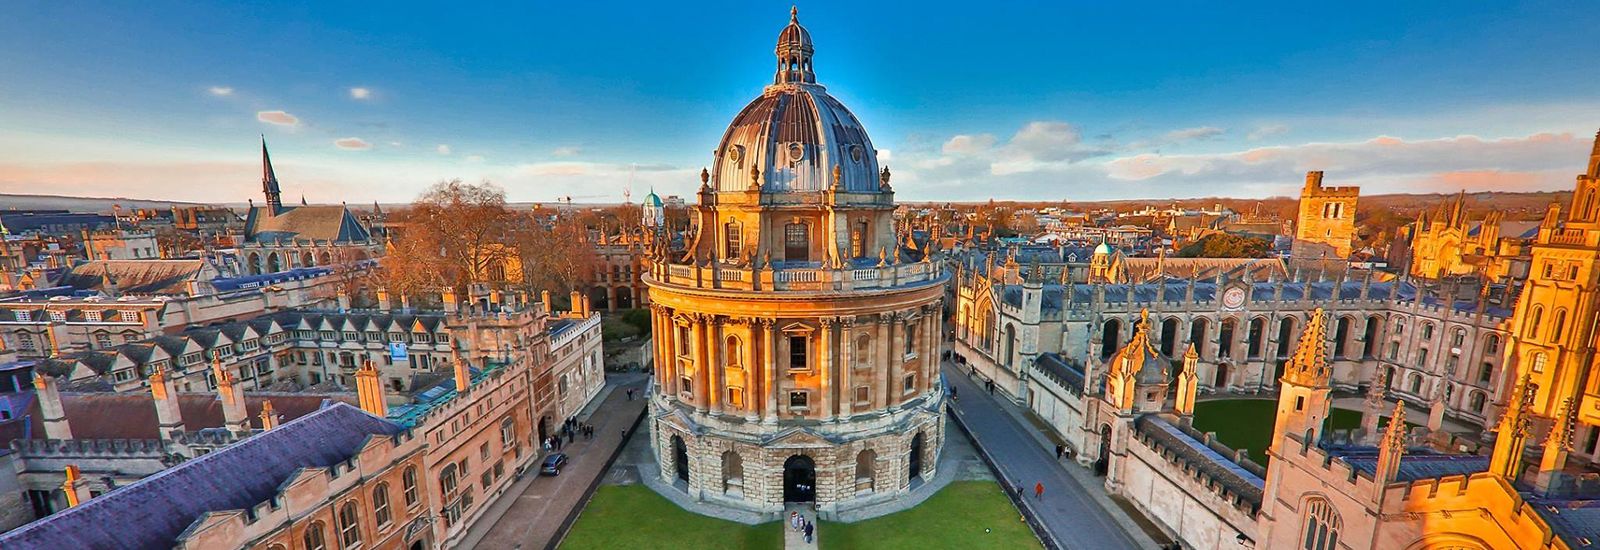 An aerial view of the Radcliffe Camera